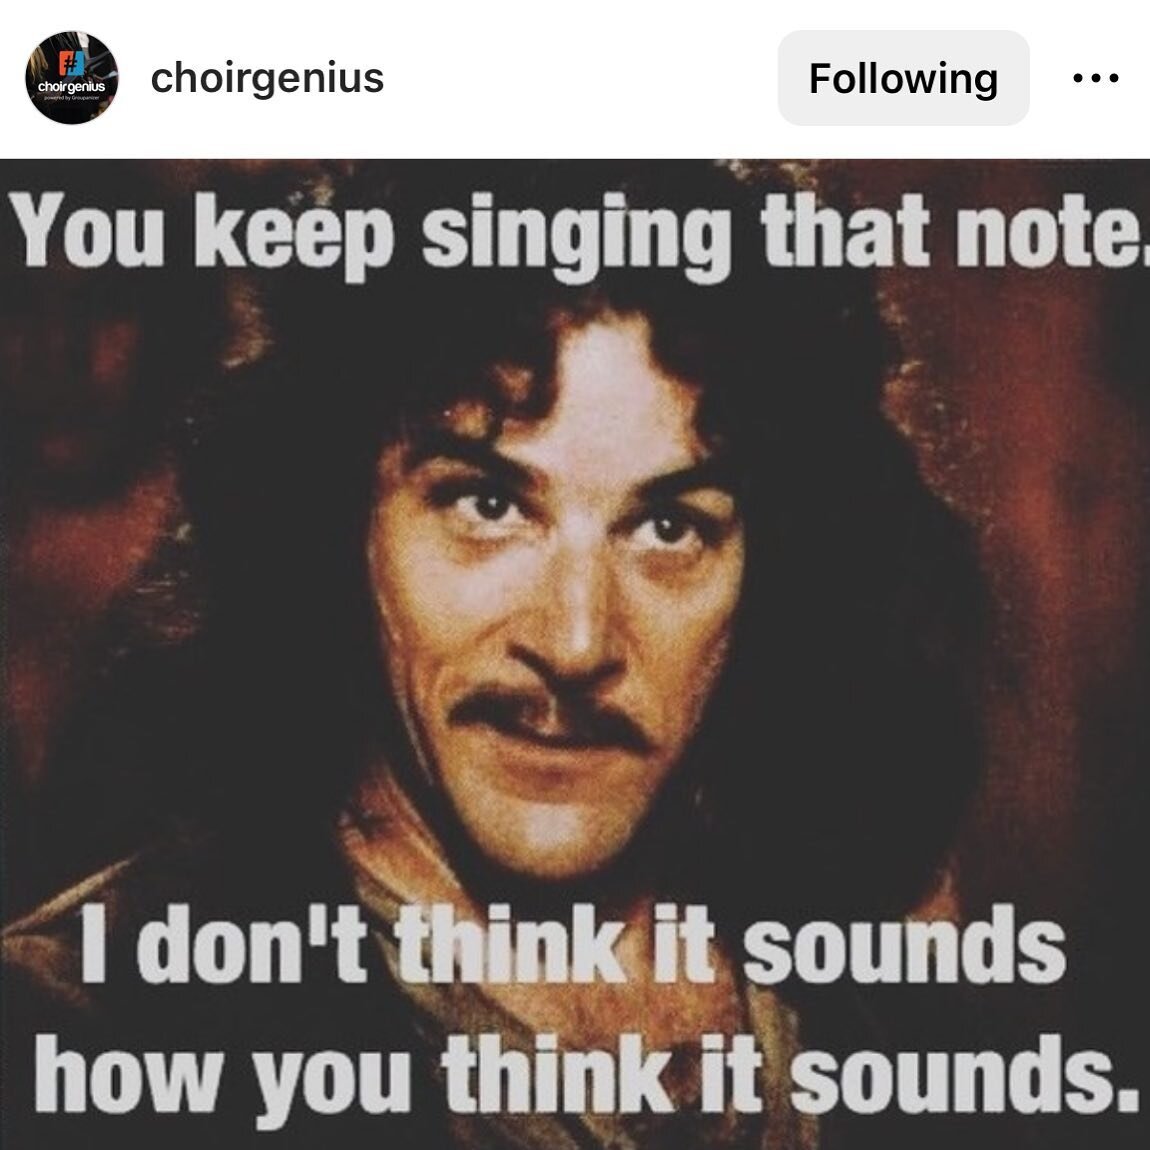 Thanking @choirgenius for this midweek chuckle. 😂 Remember, if your singer would benefit from a season of vocal training and choral experience, auditions are next week. Contact us now!